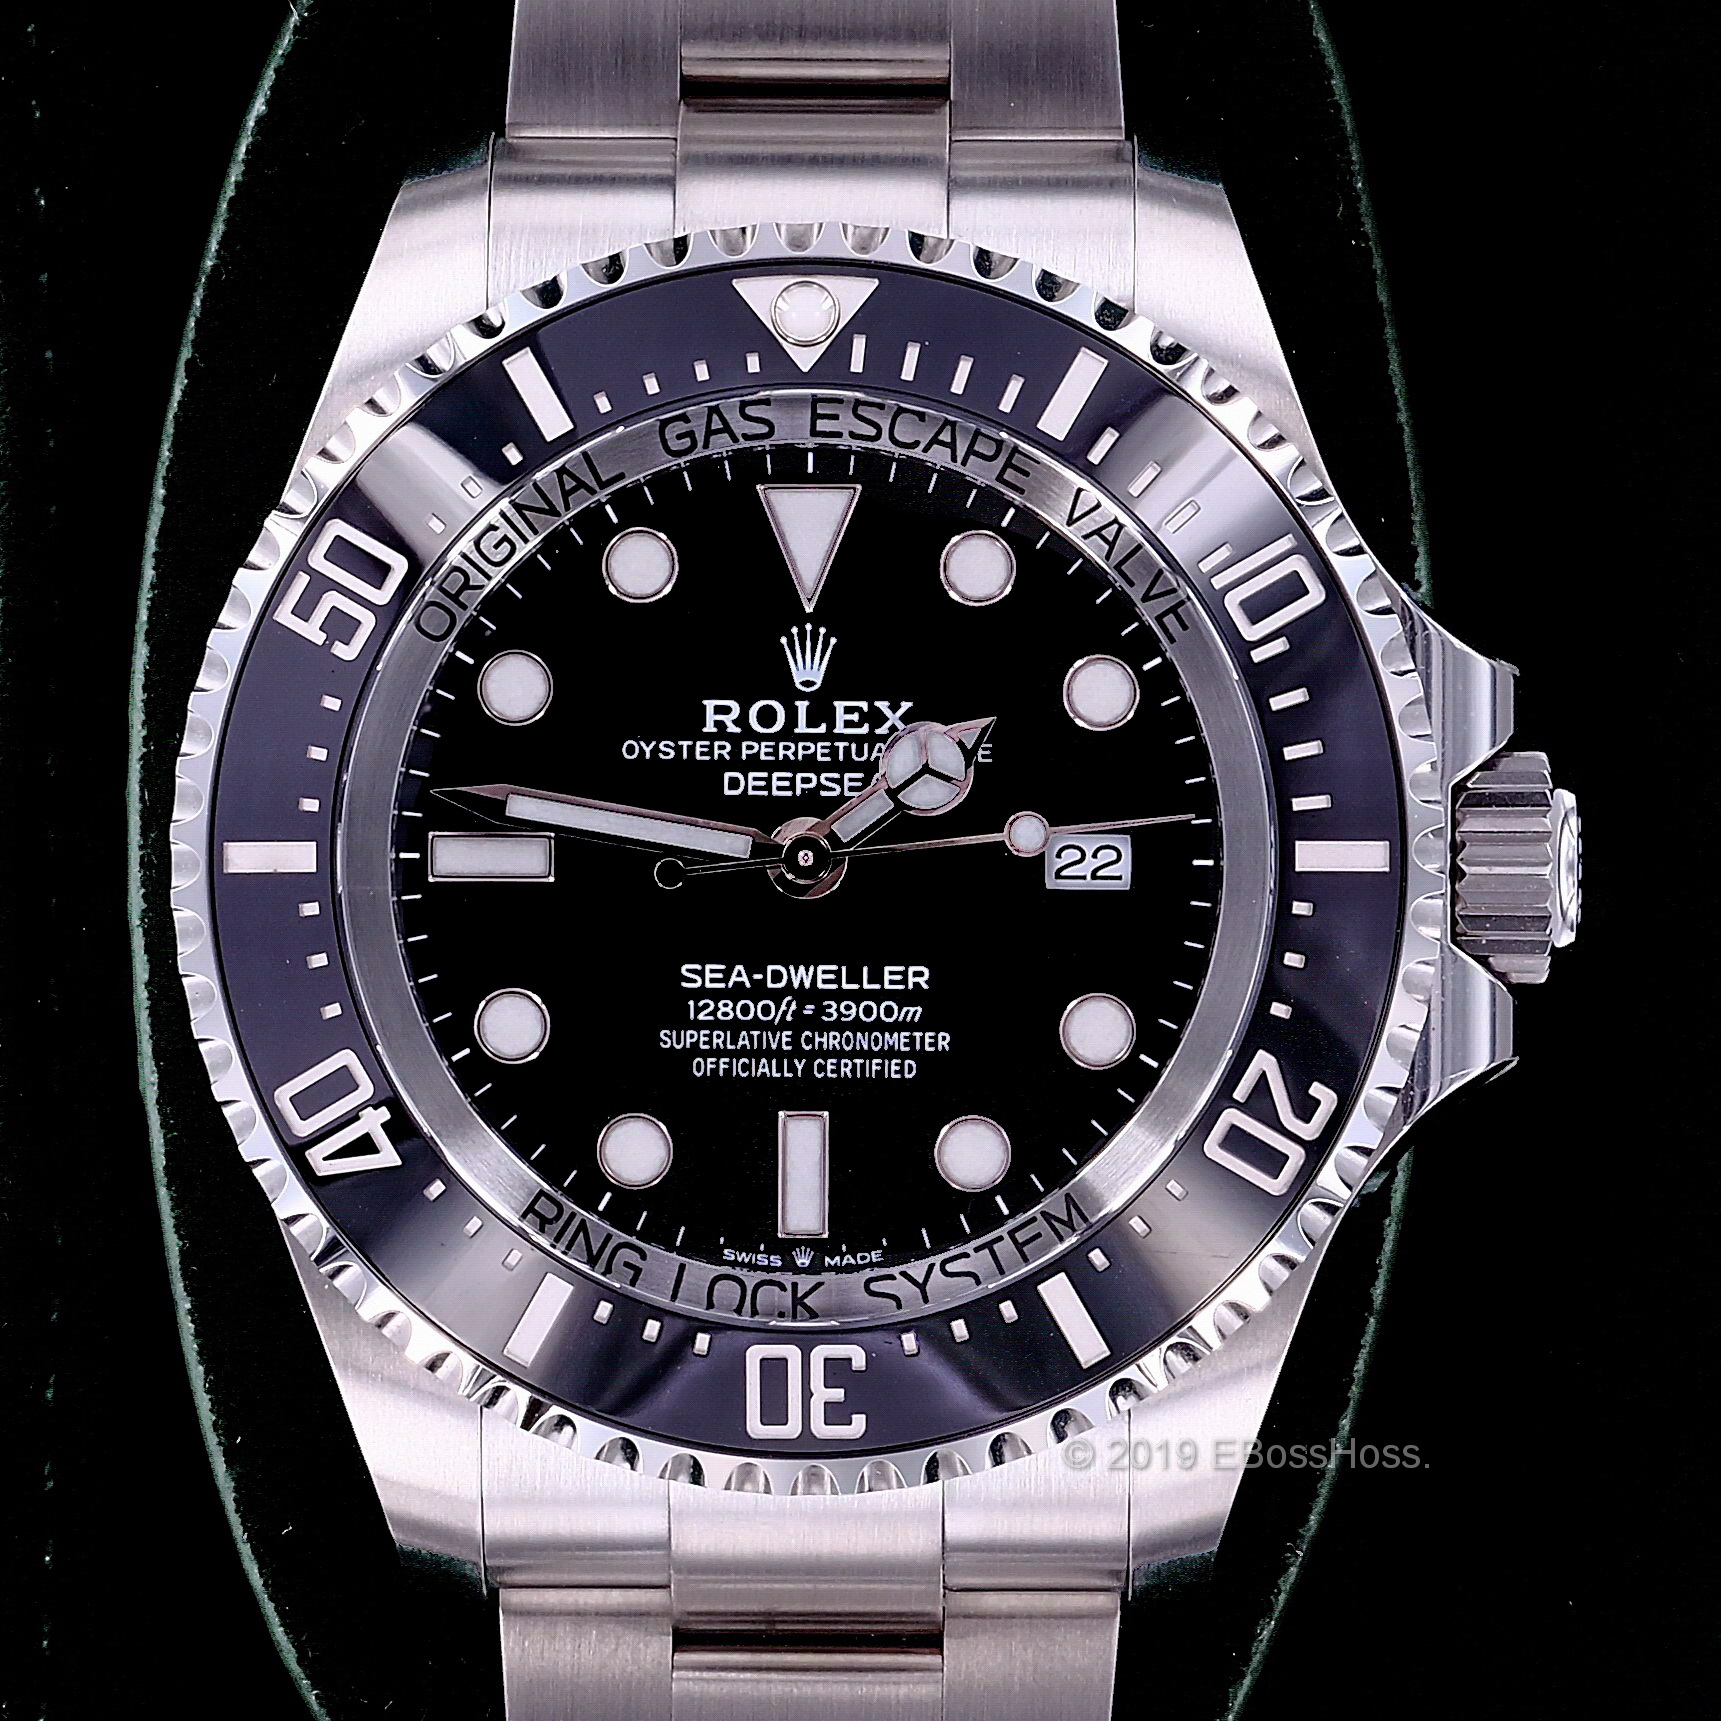 Late 2019 so Redesigned Watch Case, Movement, &amp;  the 97% of the Rolex Warranty Remains!